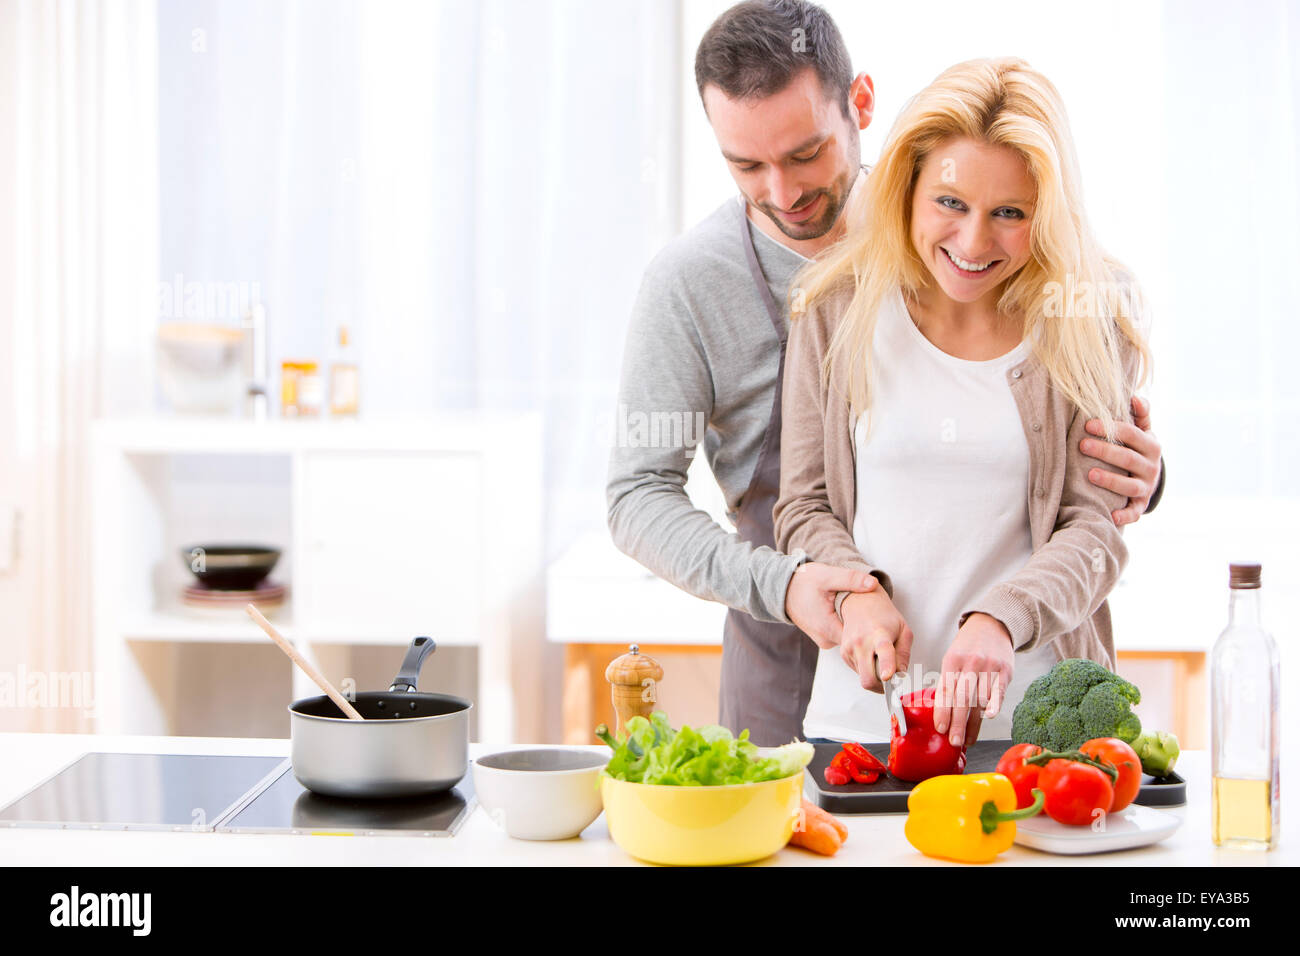 View of a Young attractive man helping out his wife while cooking Stock Photo